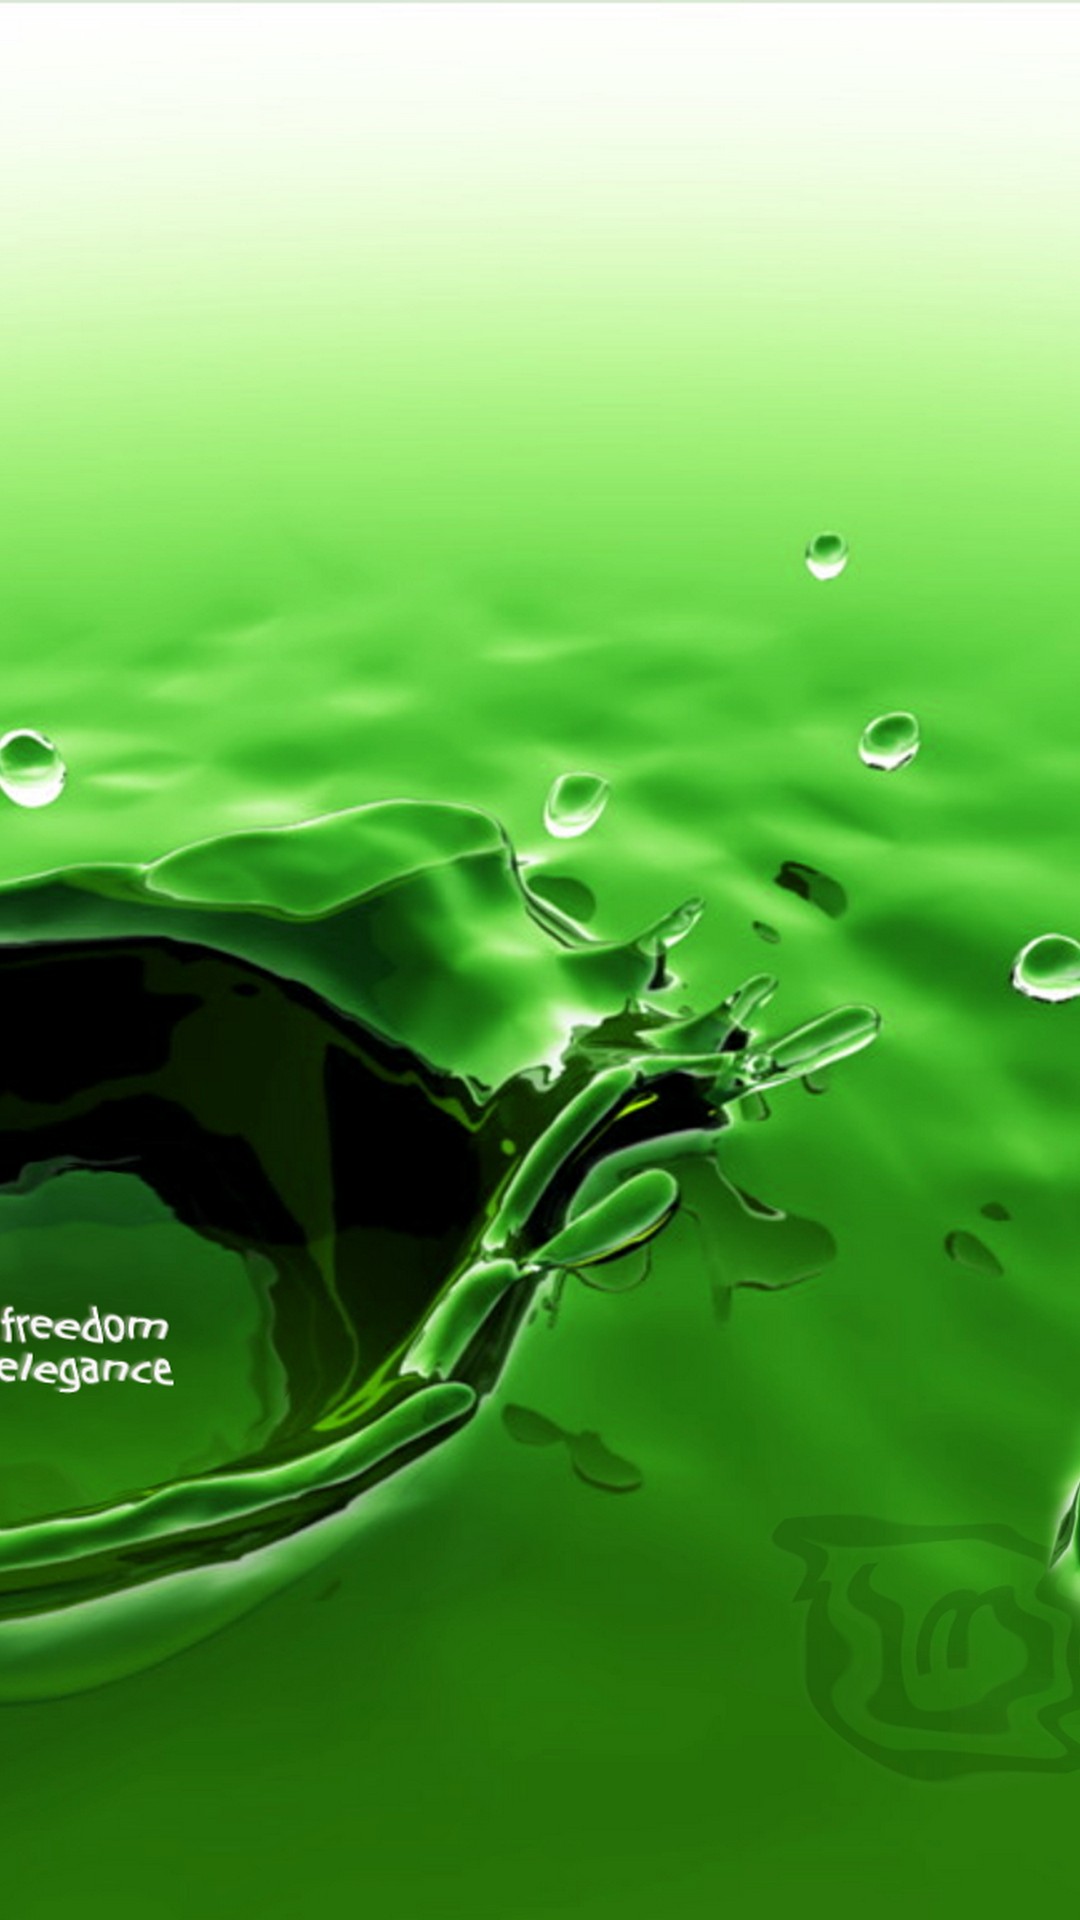 Android Wallpaper Green Colour With Image Resolution - Linux Mint Wallpaper  Hd - 1080x1920 Wallpaper 